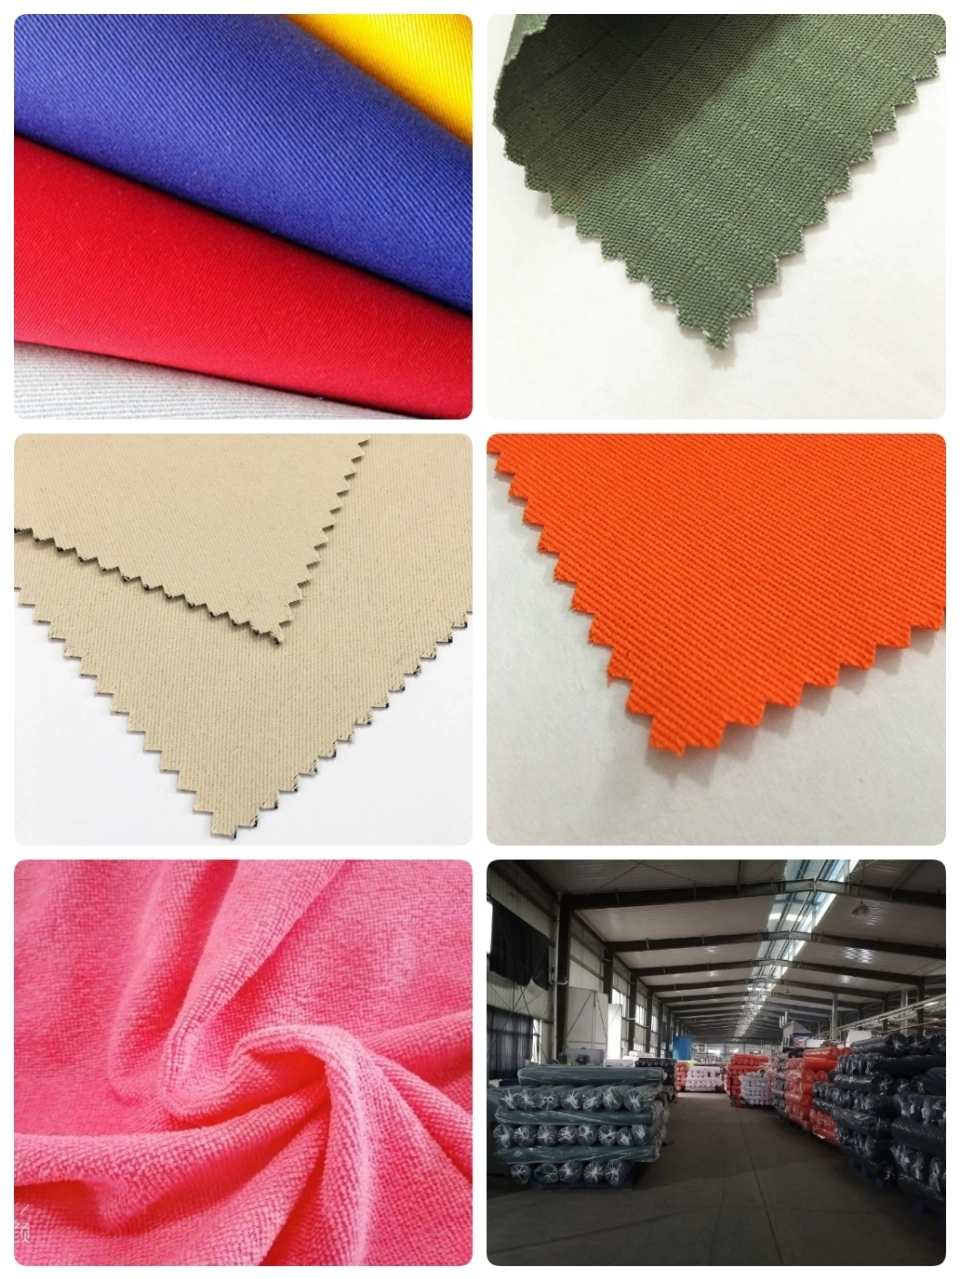 Factory Made 65%Cotton/ 35% Polyester Waterproof & Fr Fabric with 200GSM-380GSM Used in Hospital/Industy/Workwear/Coverall